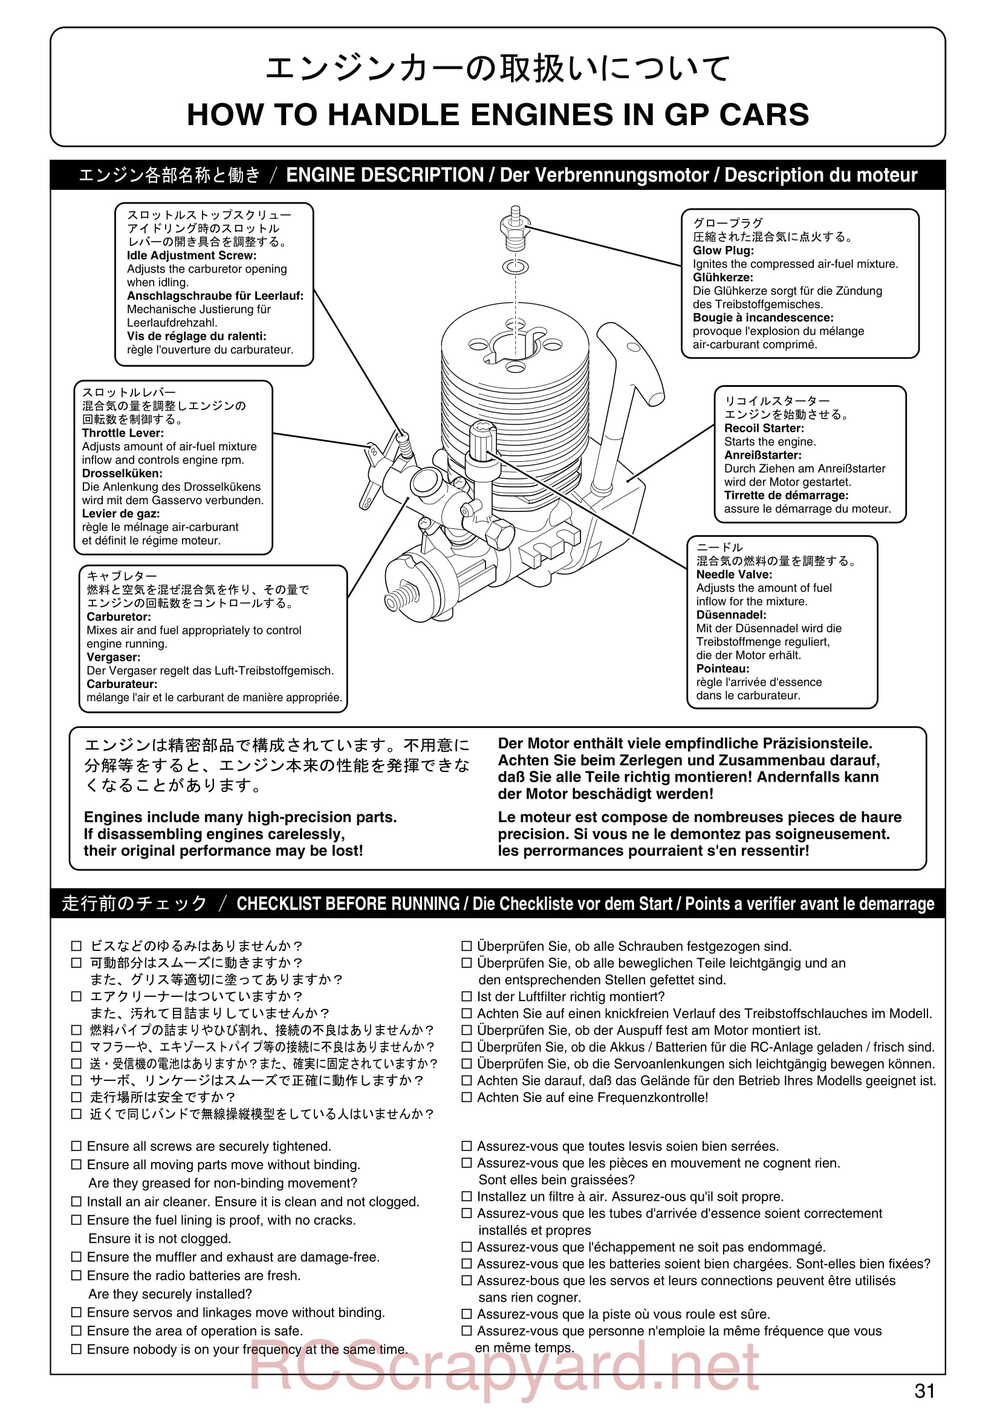 Kyosho - 31122 - V-One S2 - Manual - Page 31